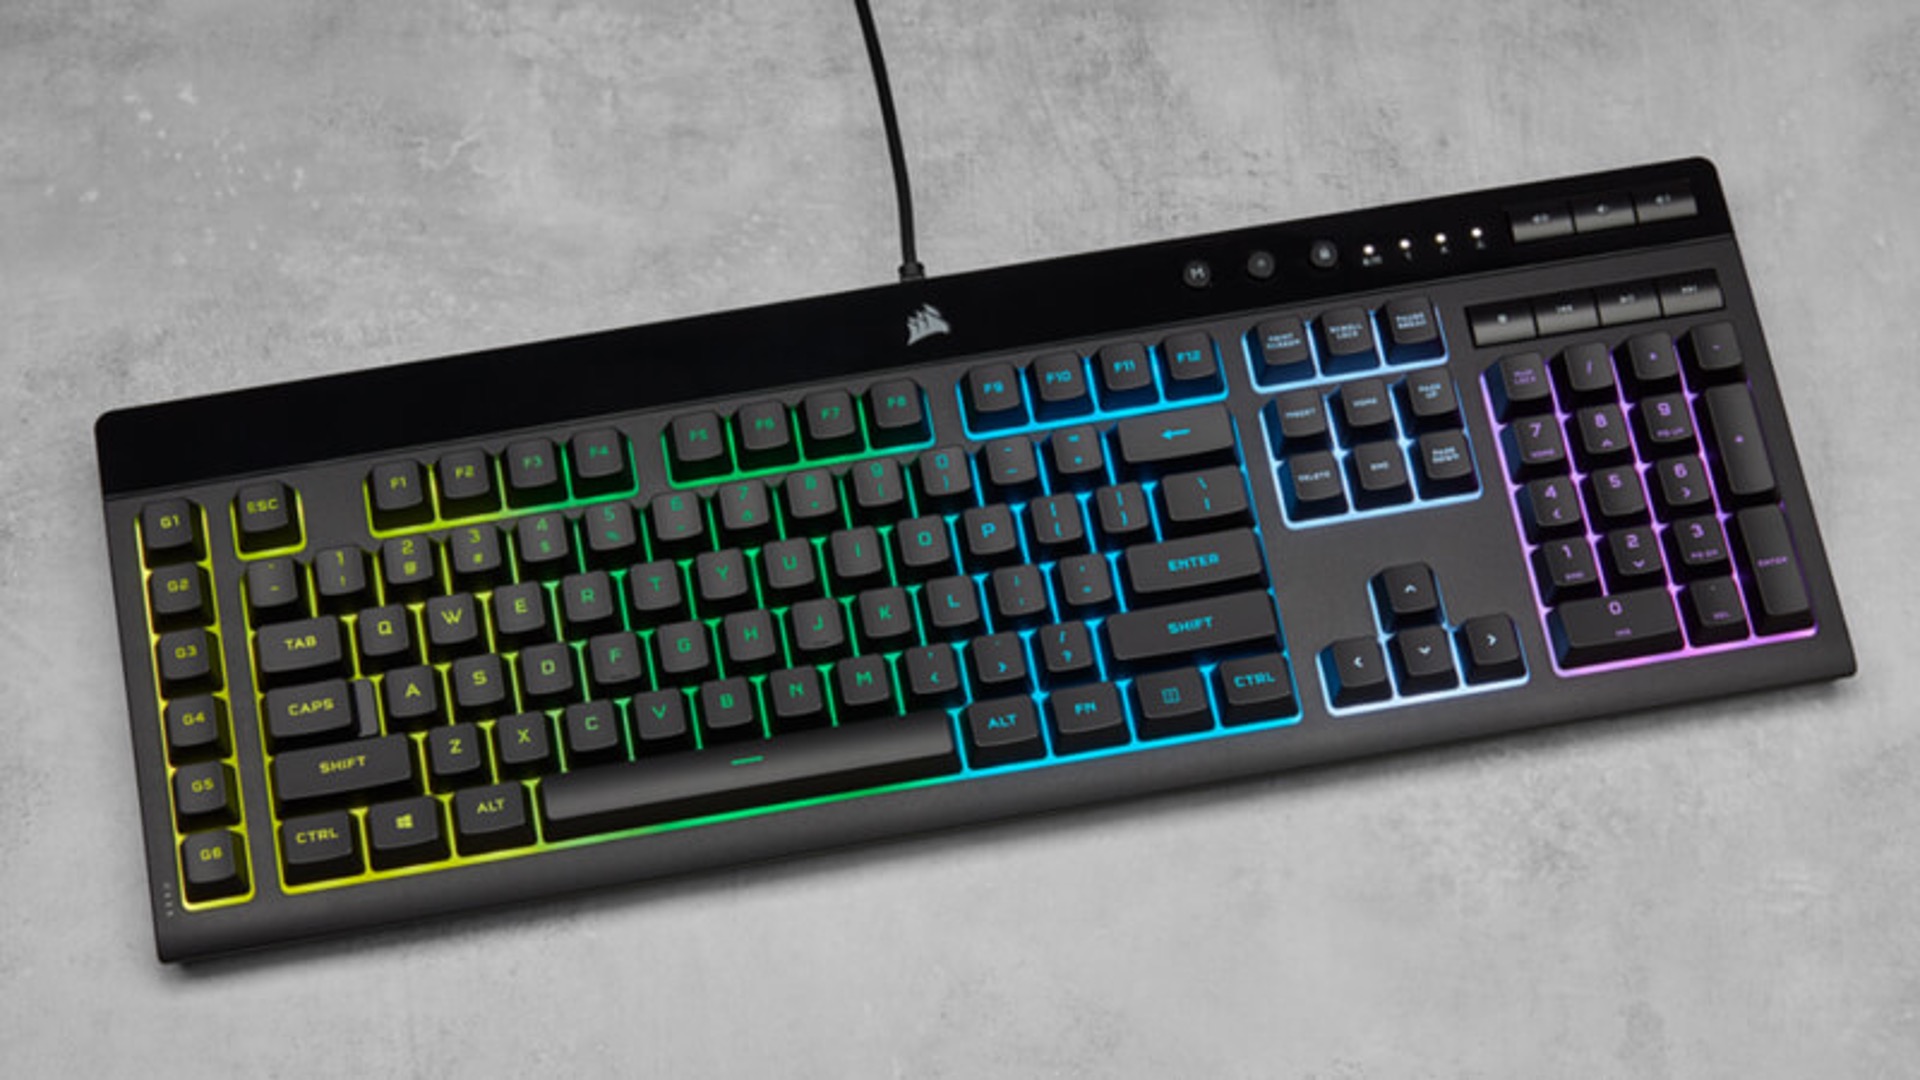 Corsair K55 RGB Pro Gaming Keyboard: How To Change Color